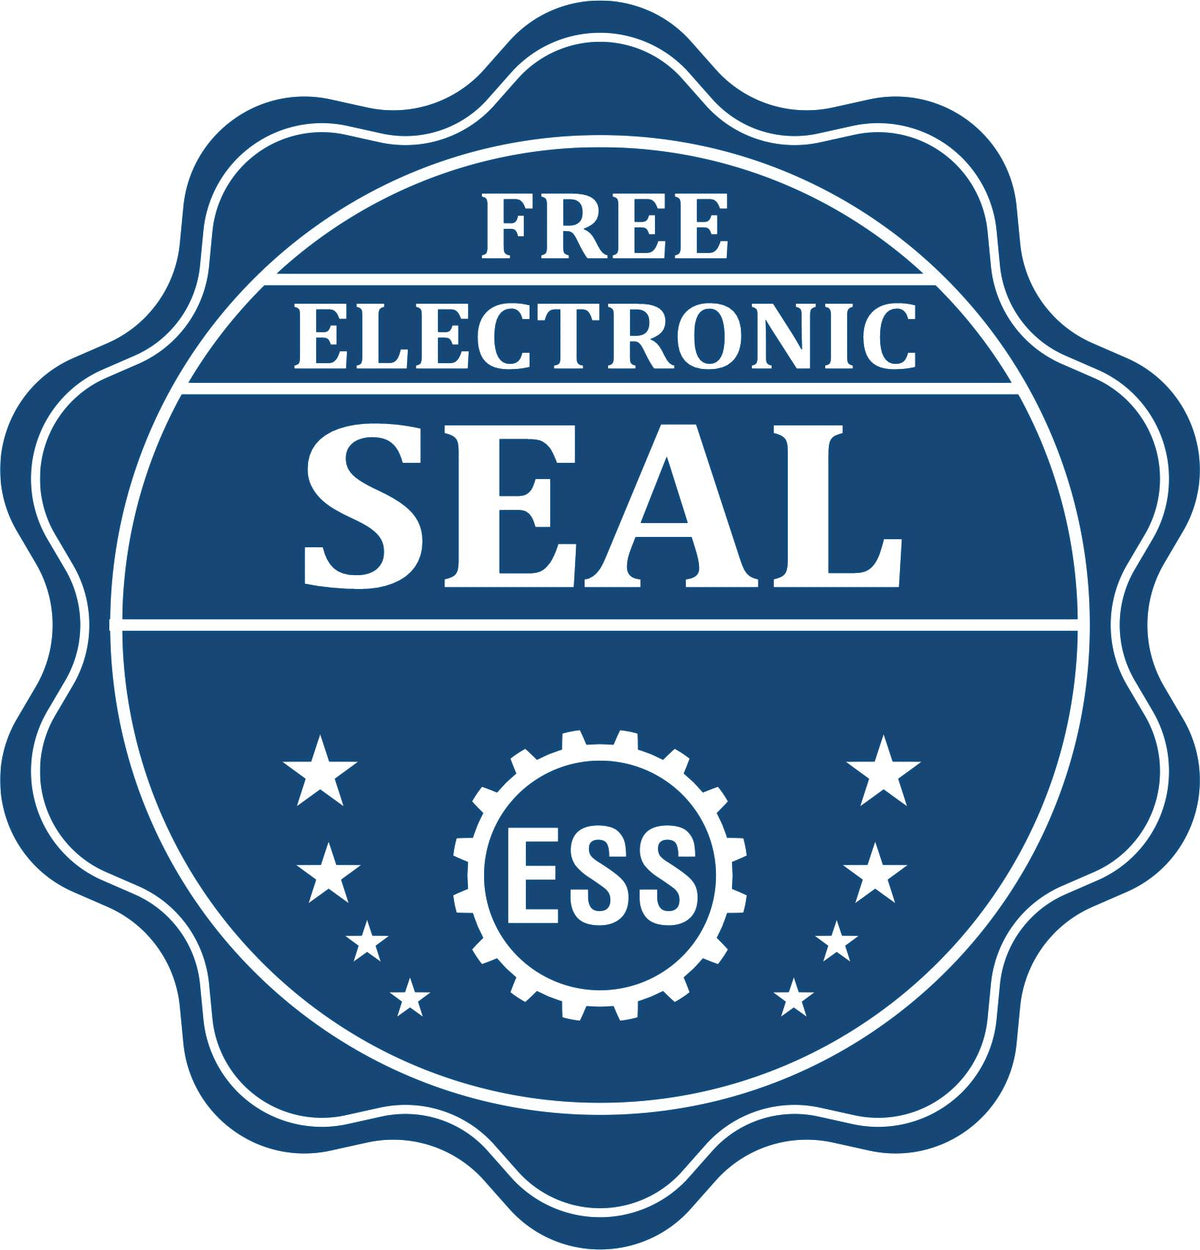 A badge showing a free electronic seal for the State of Nebraska Extended Long Reach Geologist Seal with stars and the ESS gear on the emblem.